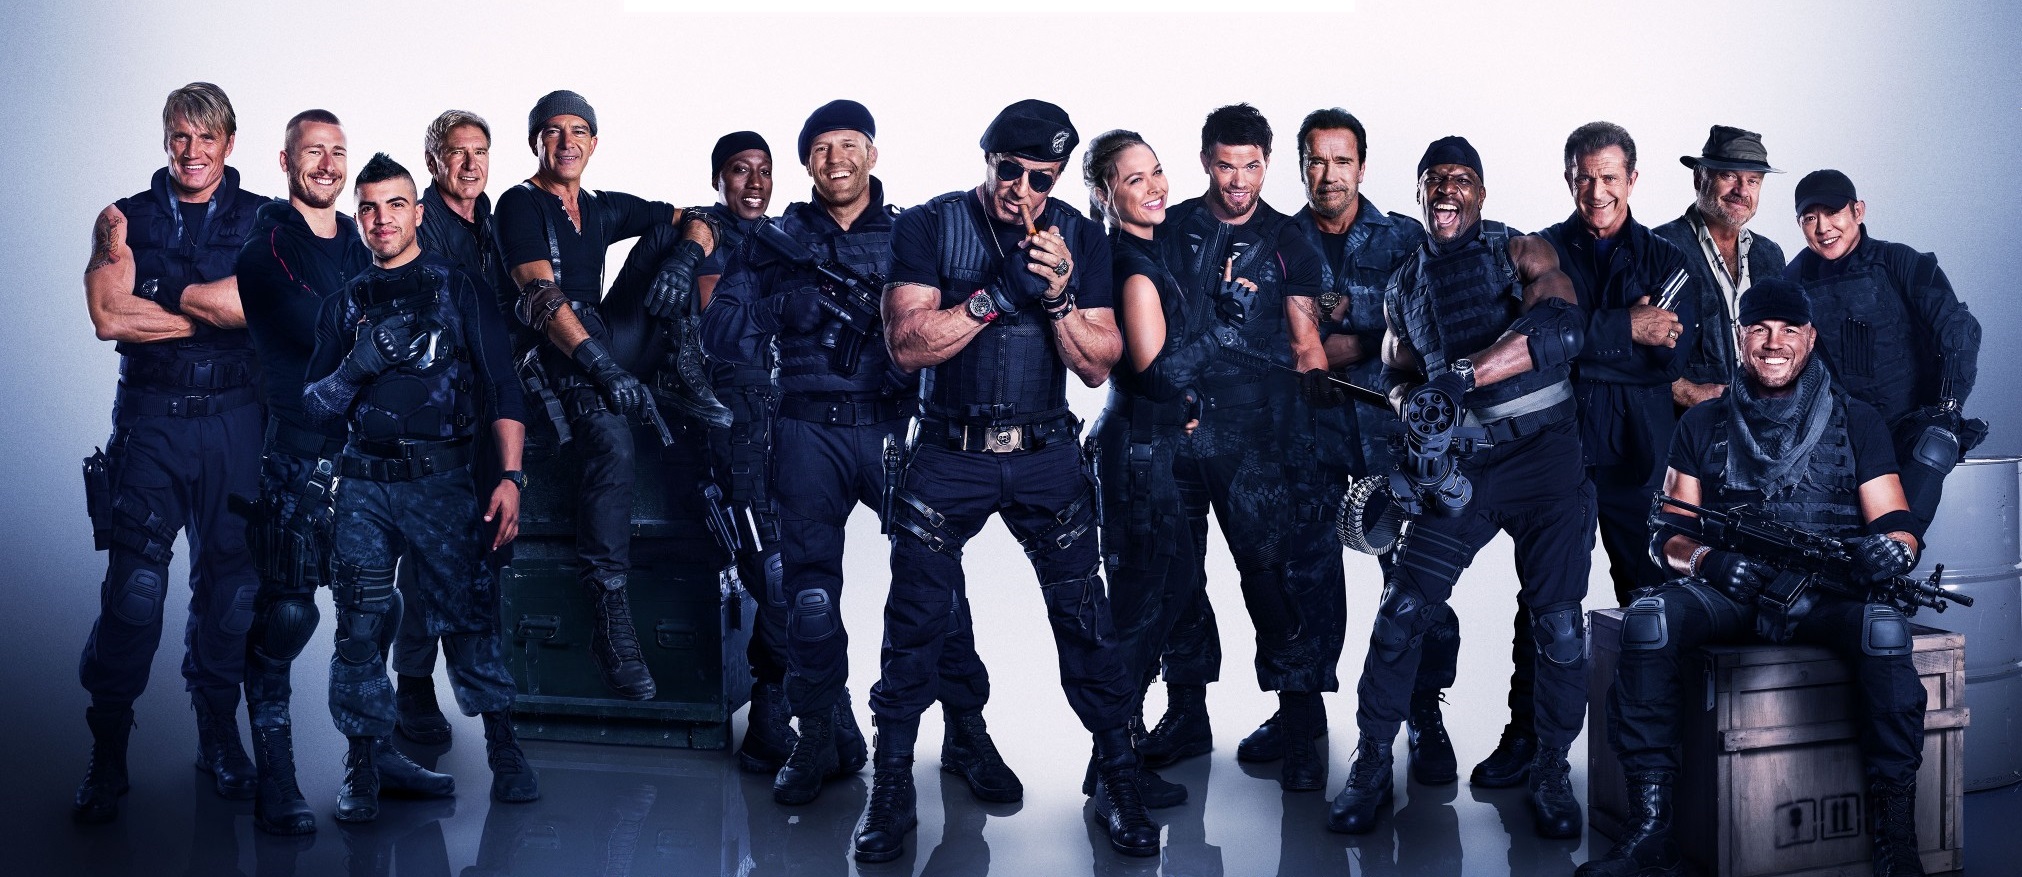 Recensie: The Expendables 3